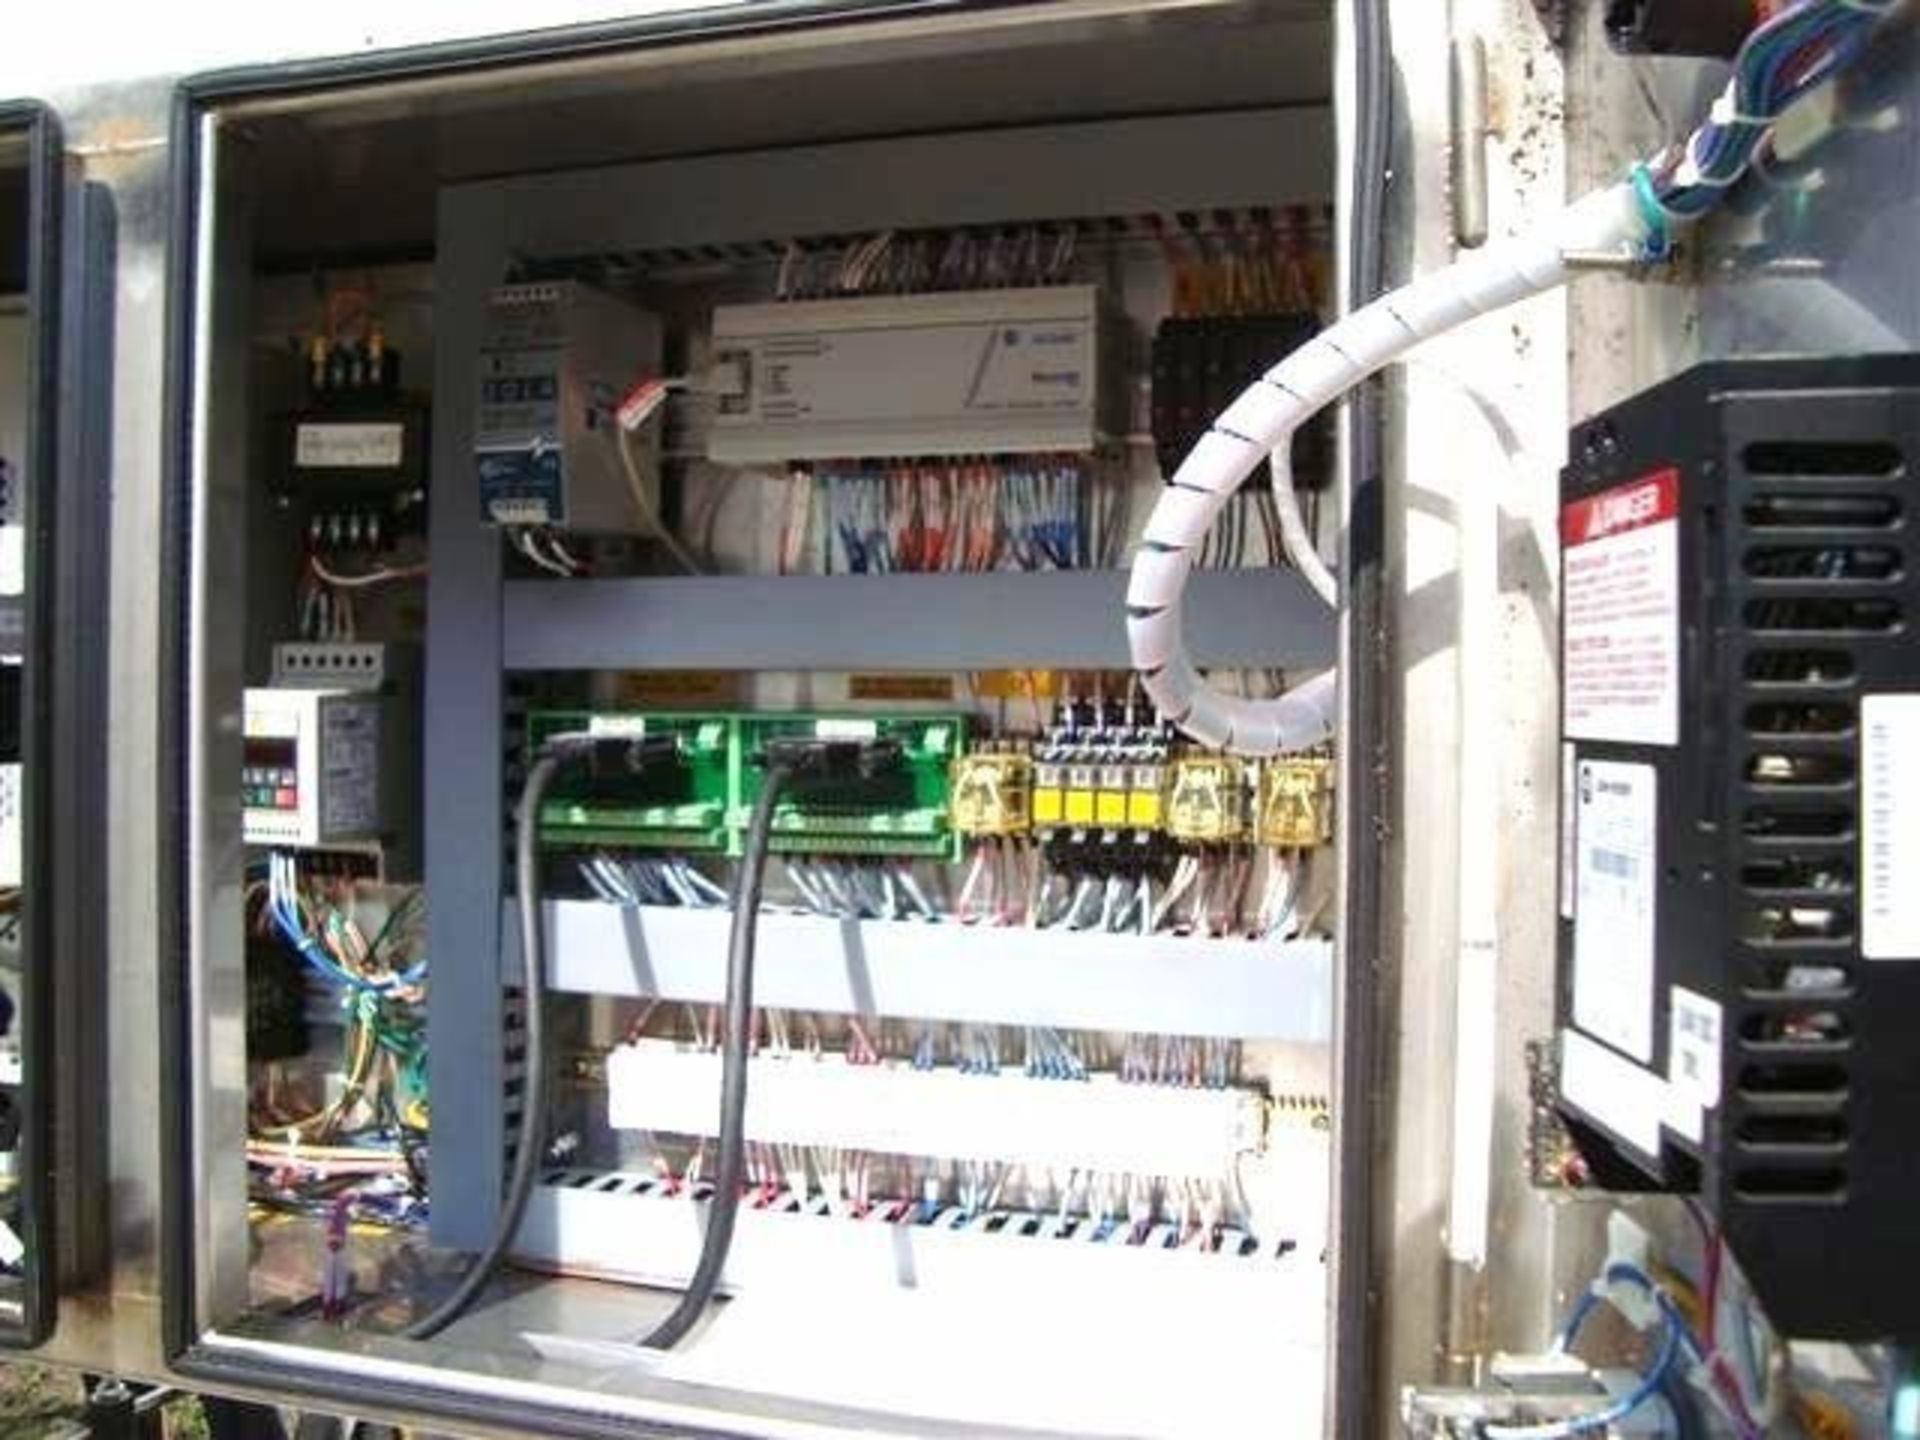 Food Process Systems S/S Sanitary Box Filler, Model 6000, S/N 145702 with Allen Bradley Ultra 3000 - Image 7 of 12